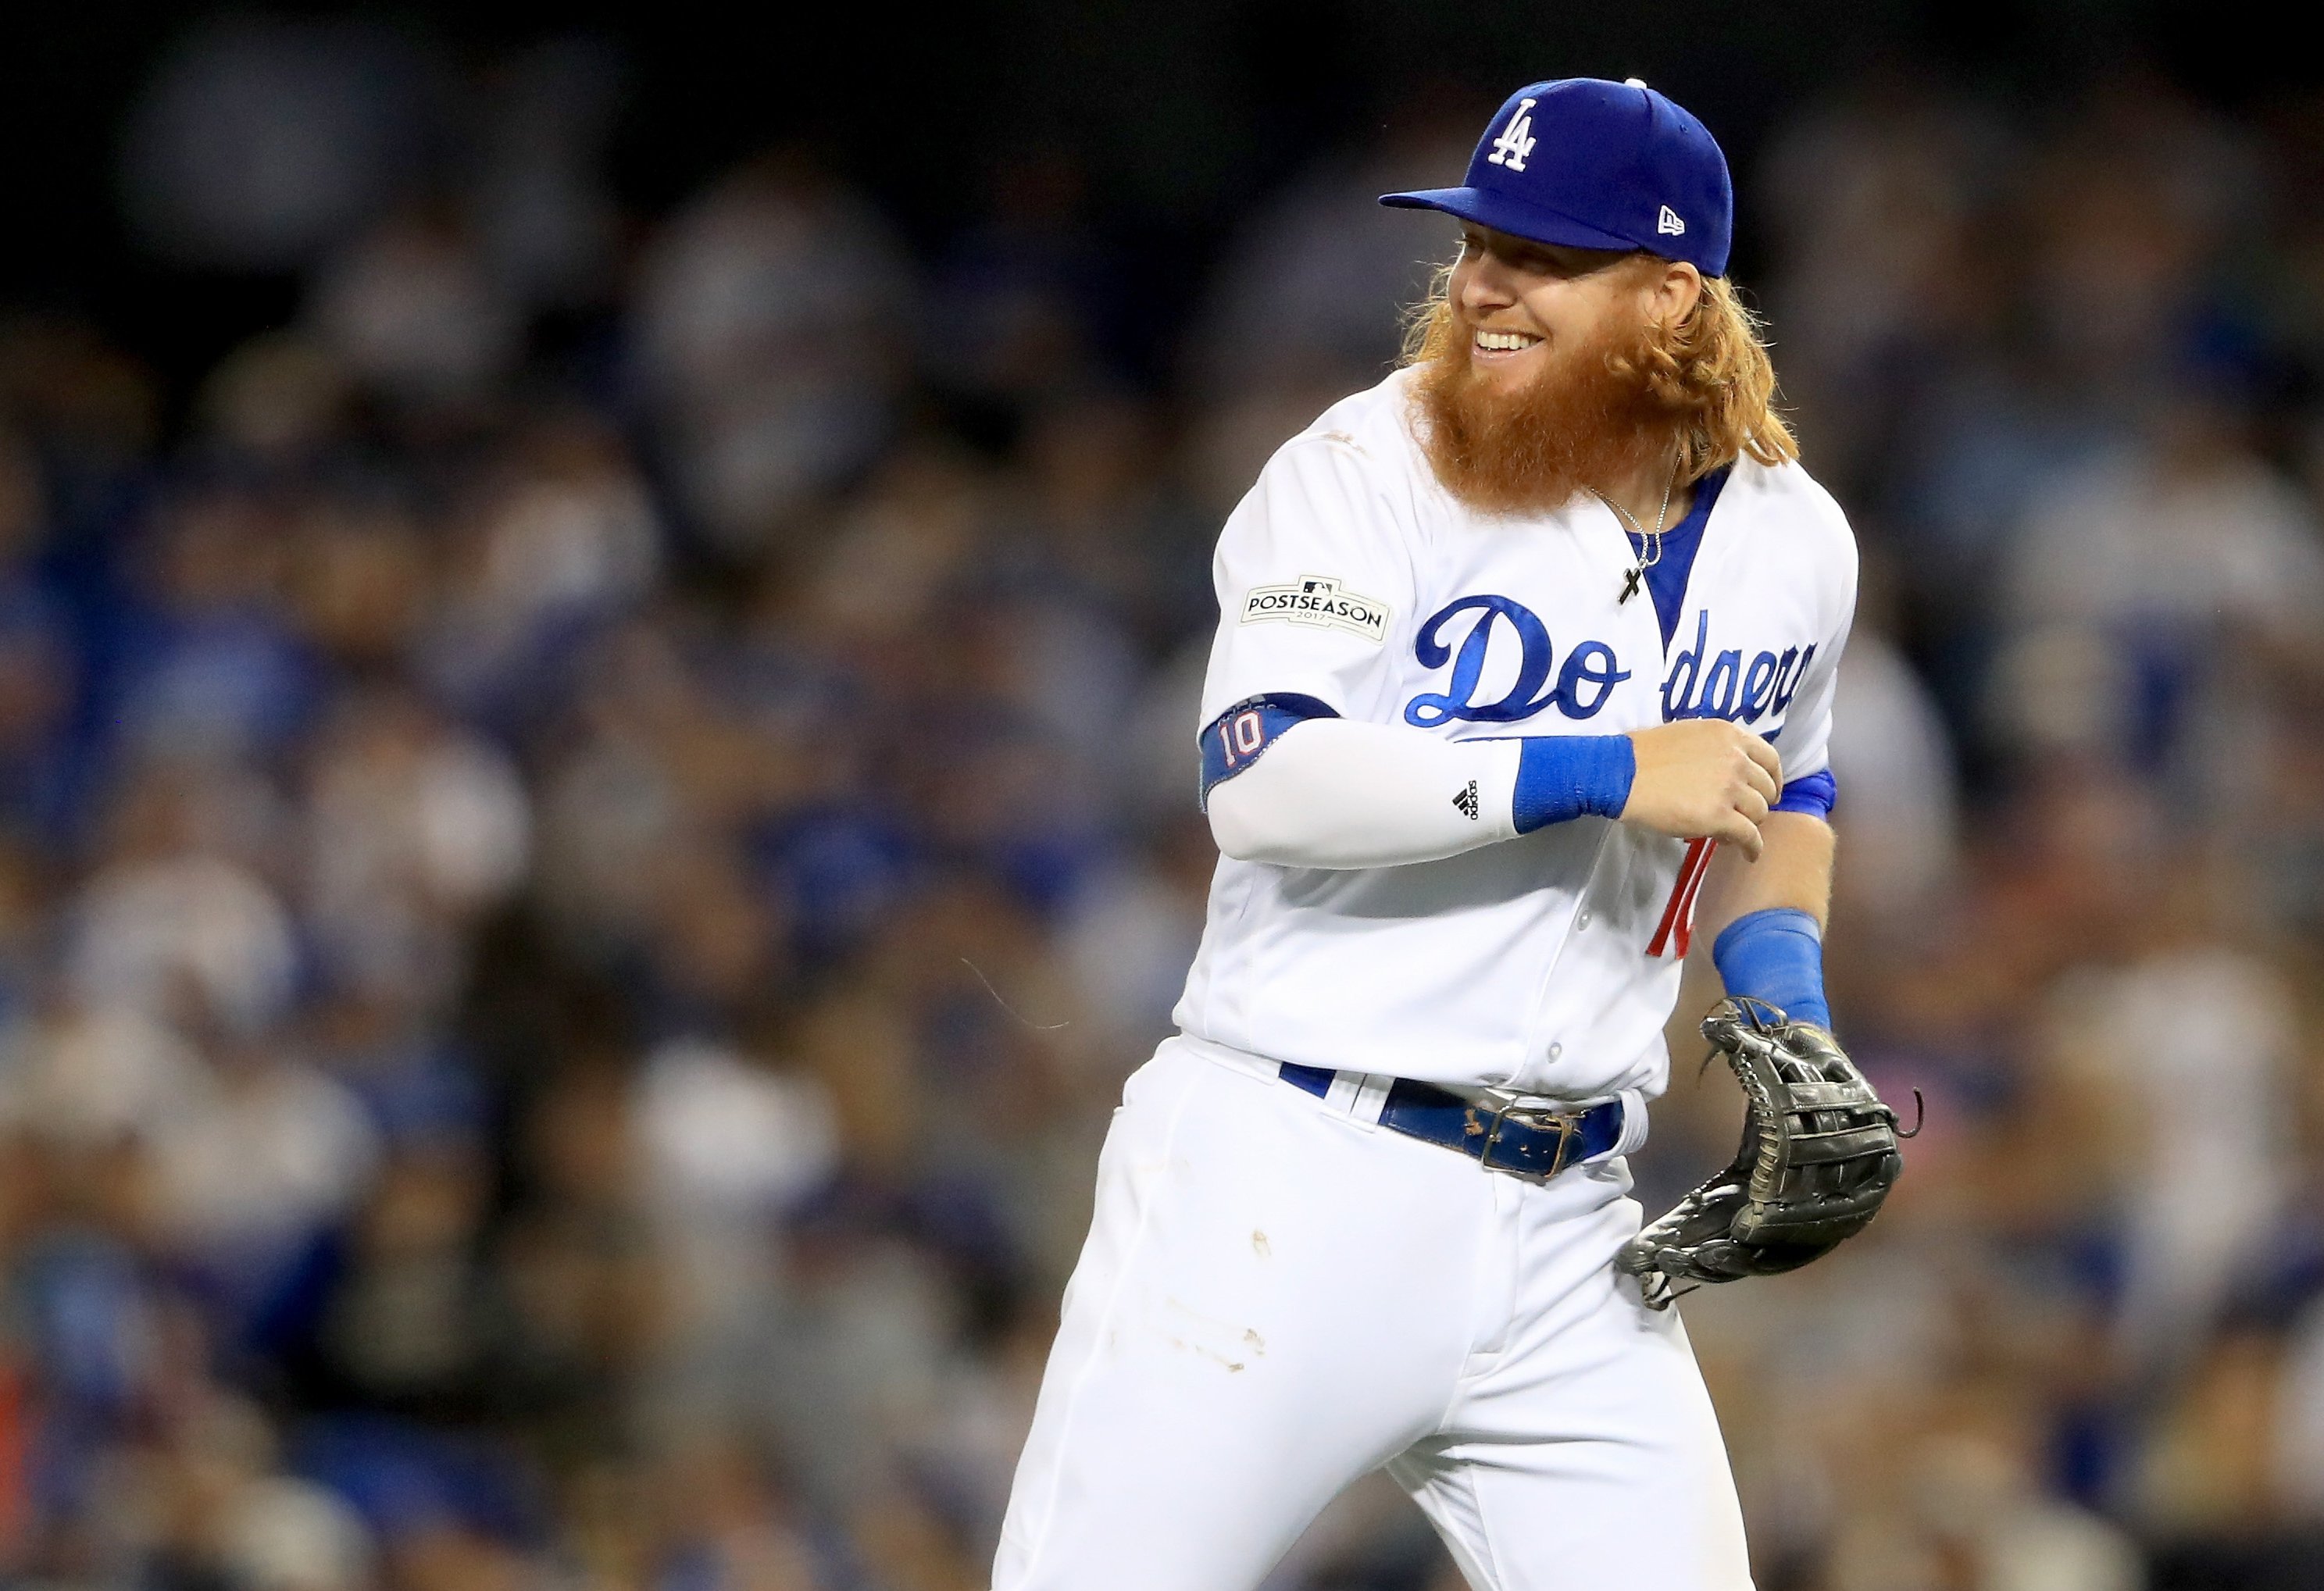 Justin Turner recklessly defied MLB security after Dodgers' win